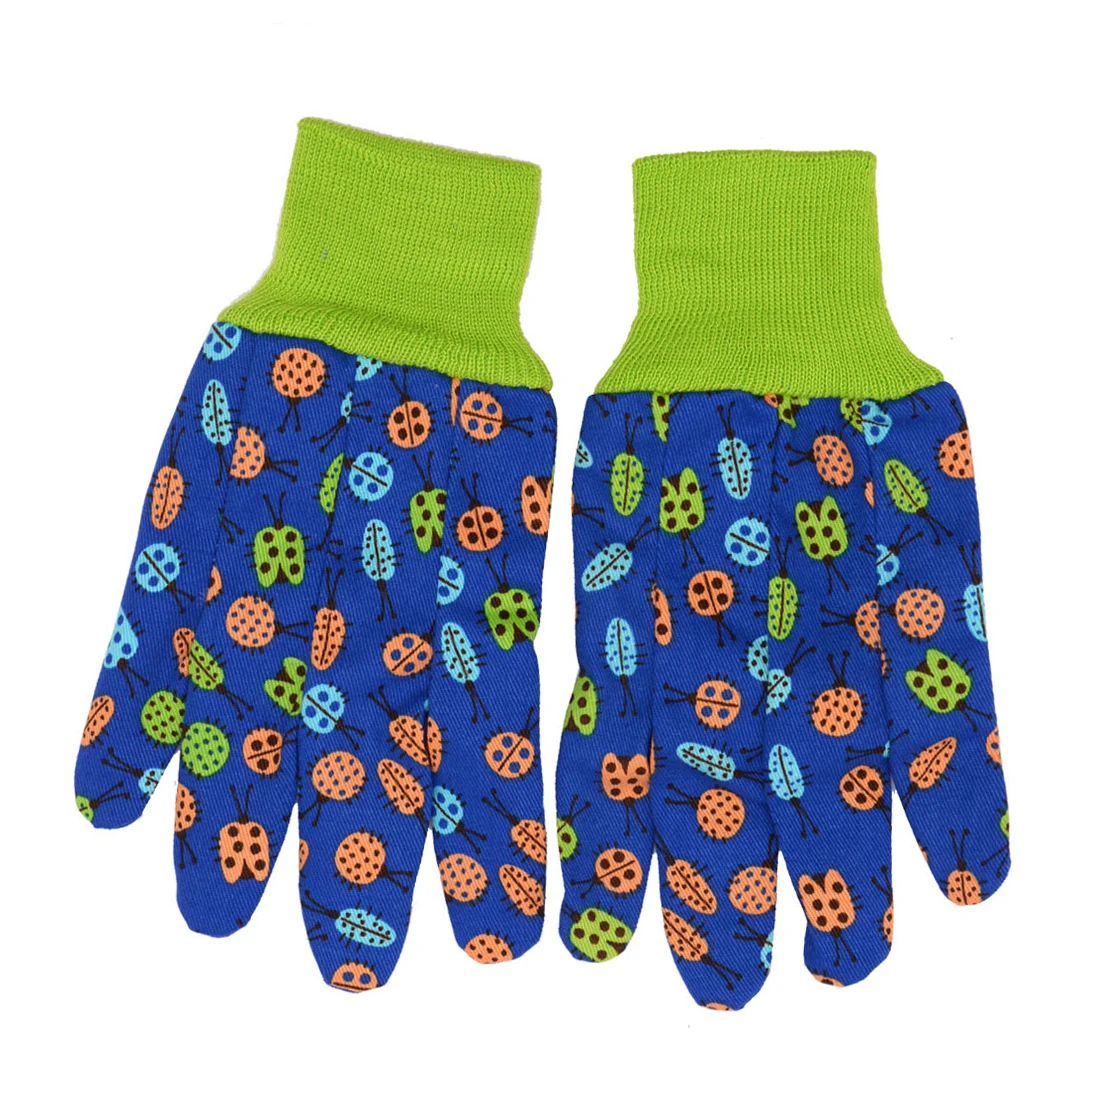 

blue assorted protective gardening unisex gloves cute printed garden gloves with claws for digging planting, Dark blue